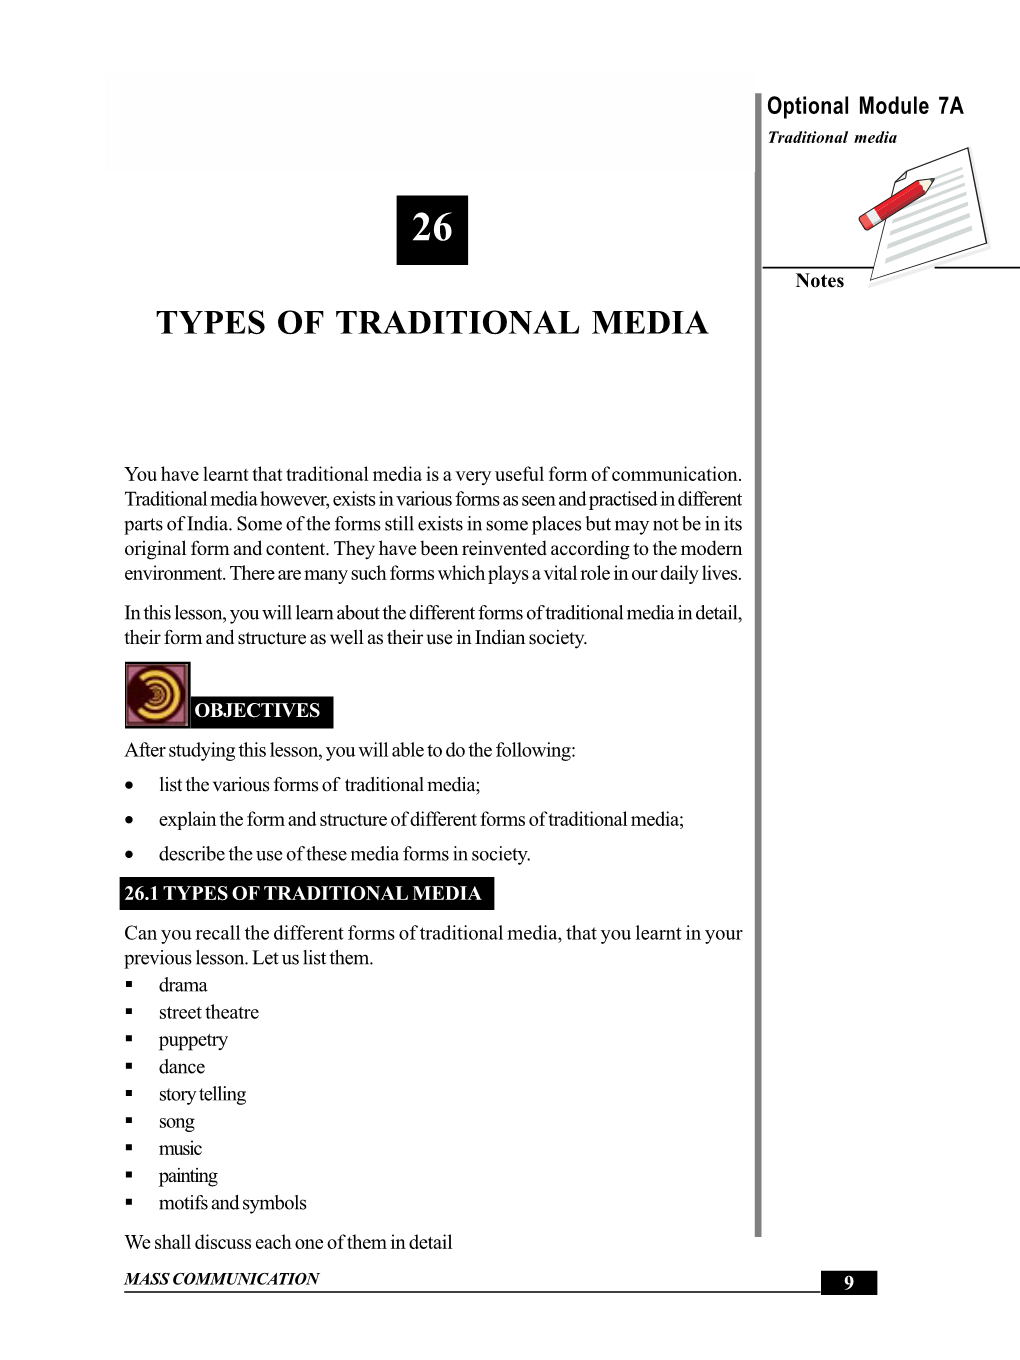 Types of Traditional Media Optional Module 7A Traditional Media